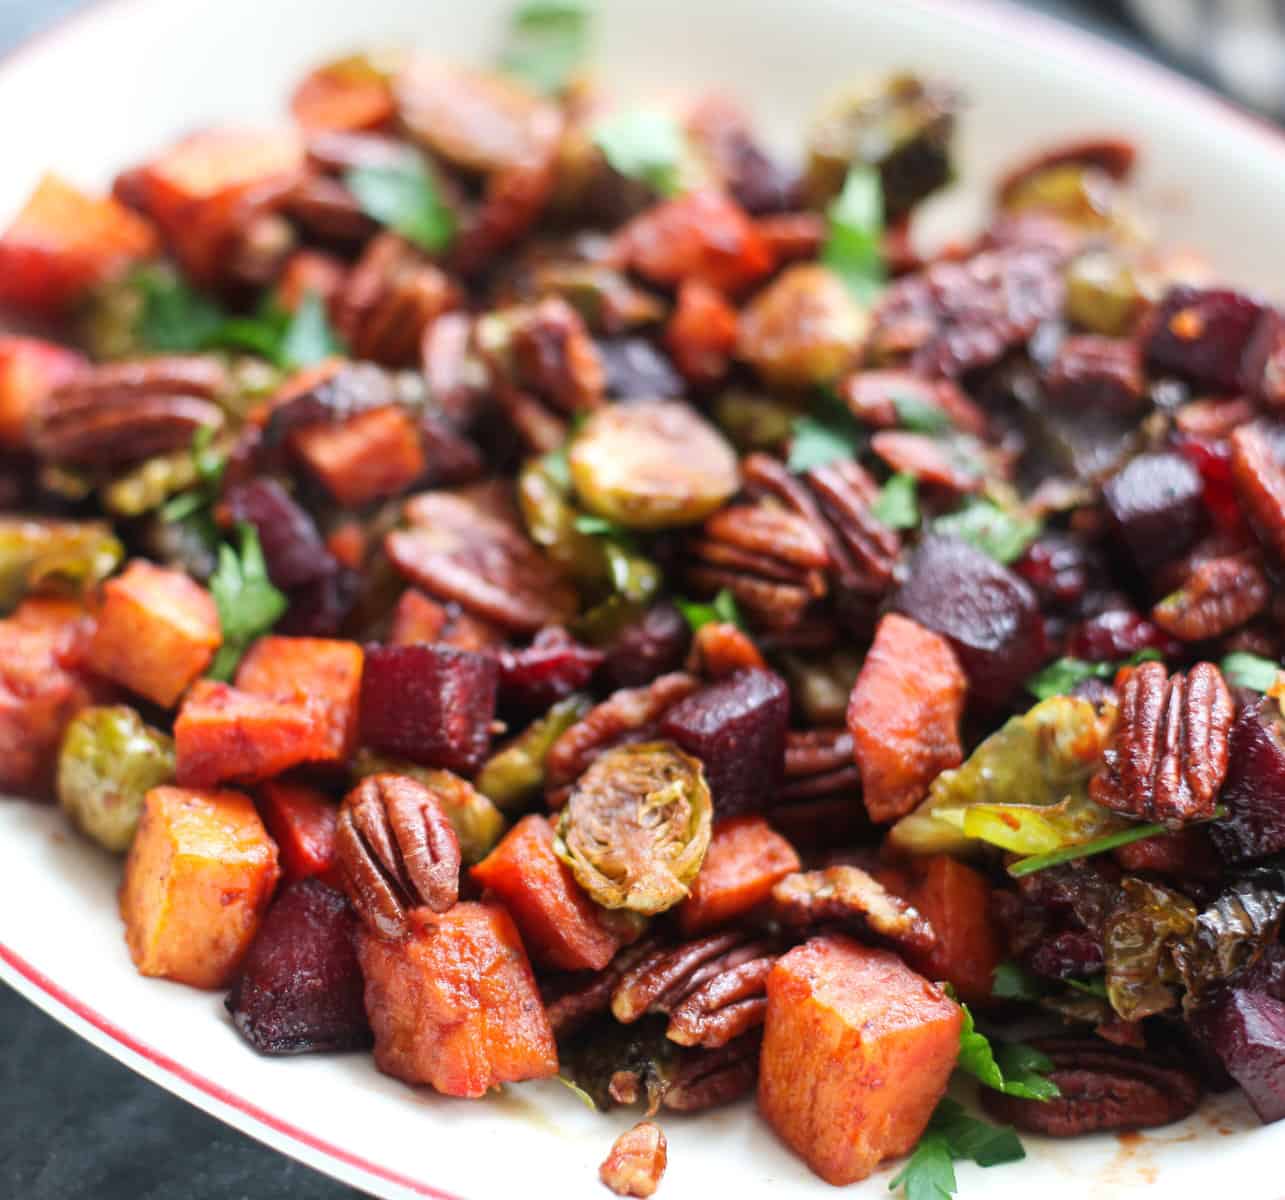 A plate of roasted vegetables.